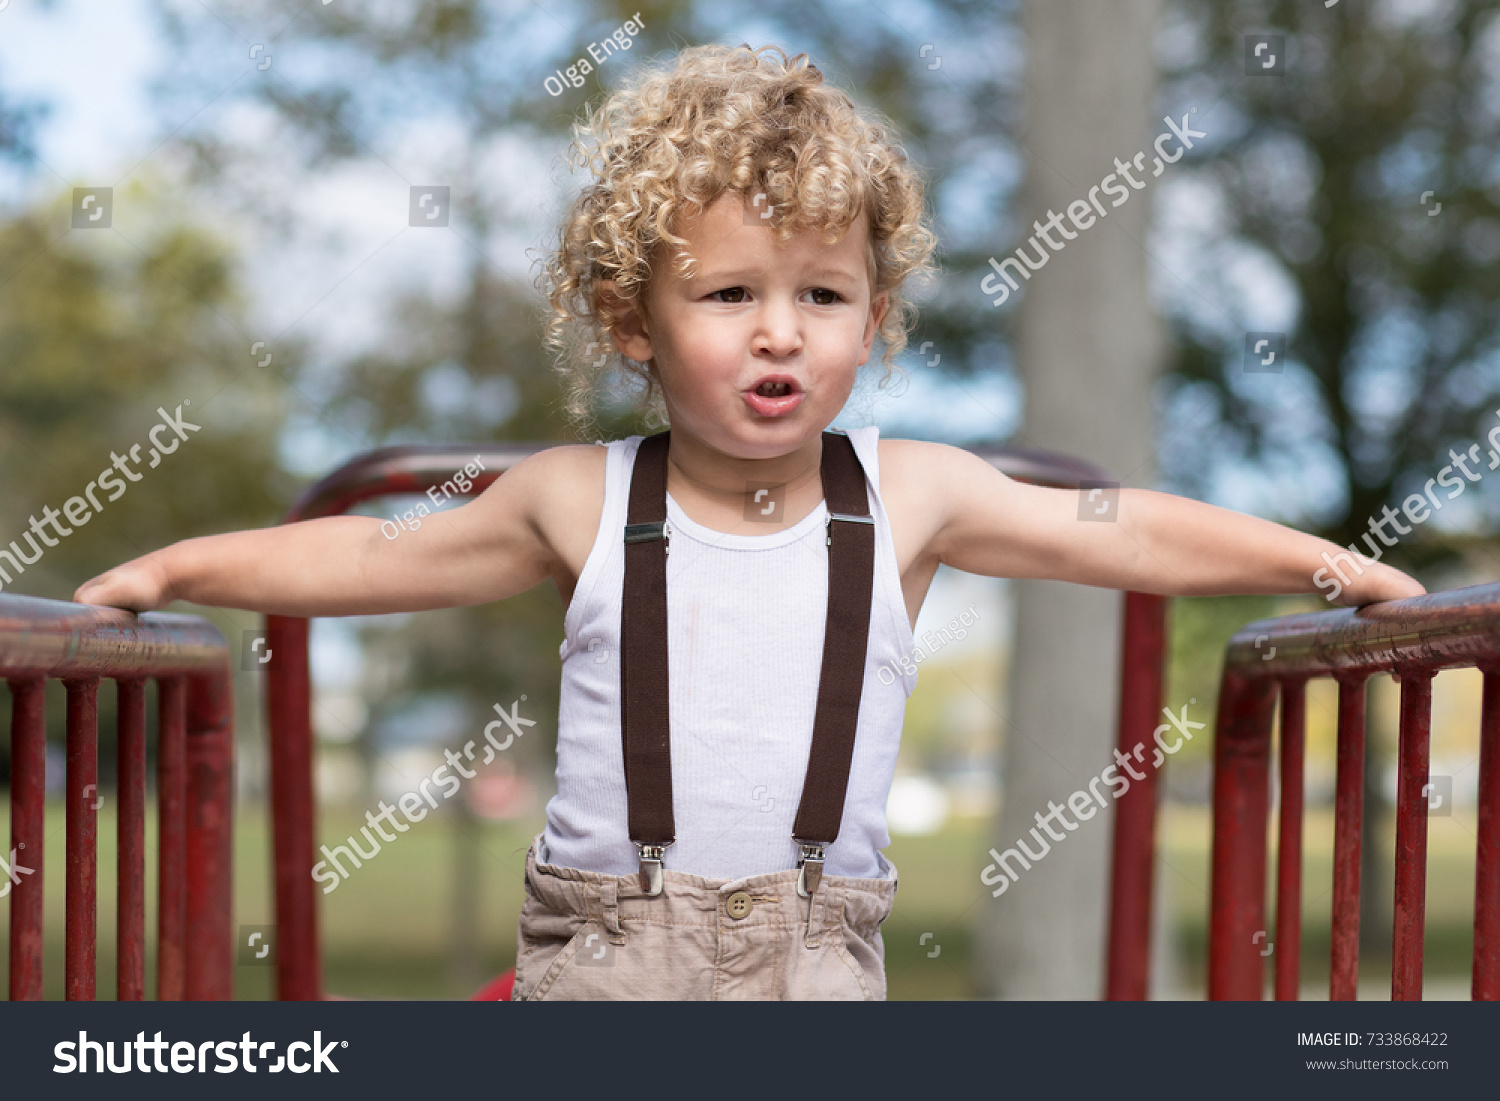 Young Boy Long Curly Blonde Hair Stock Photo Edit Now 733868422